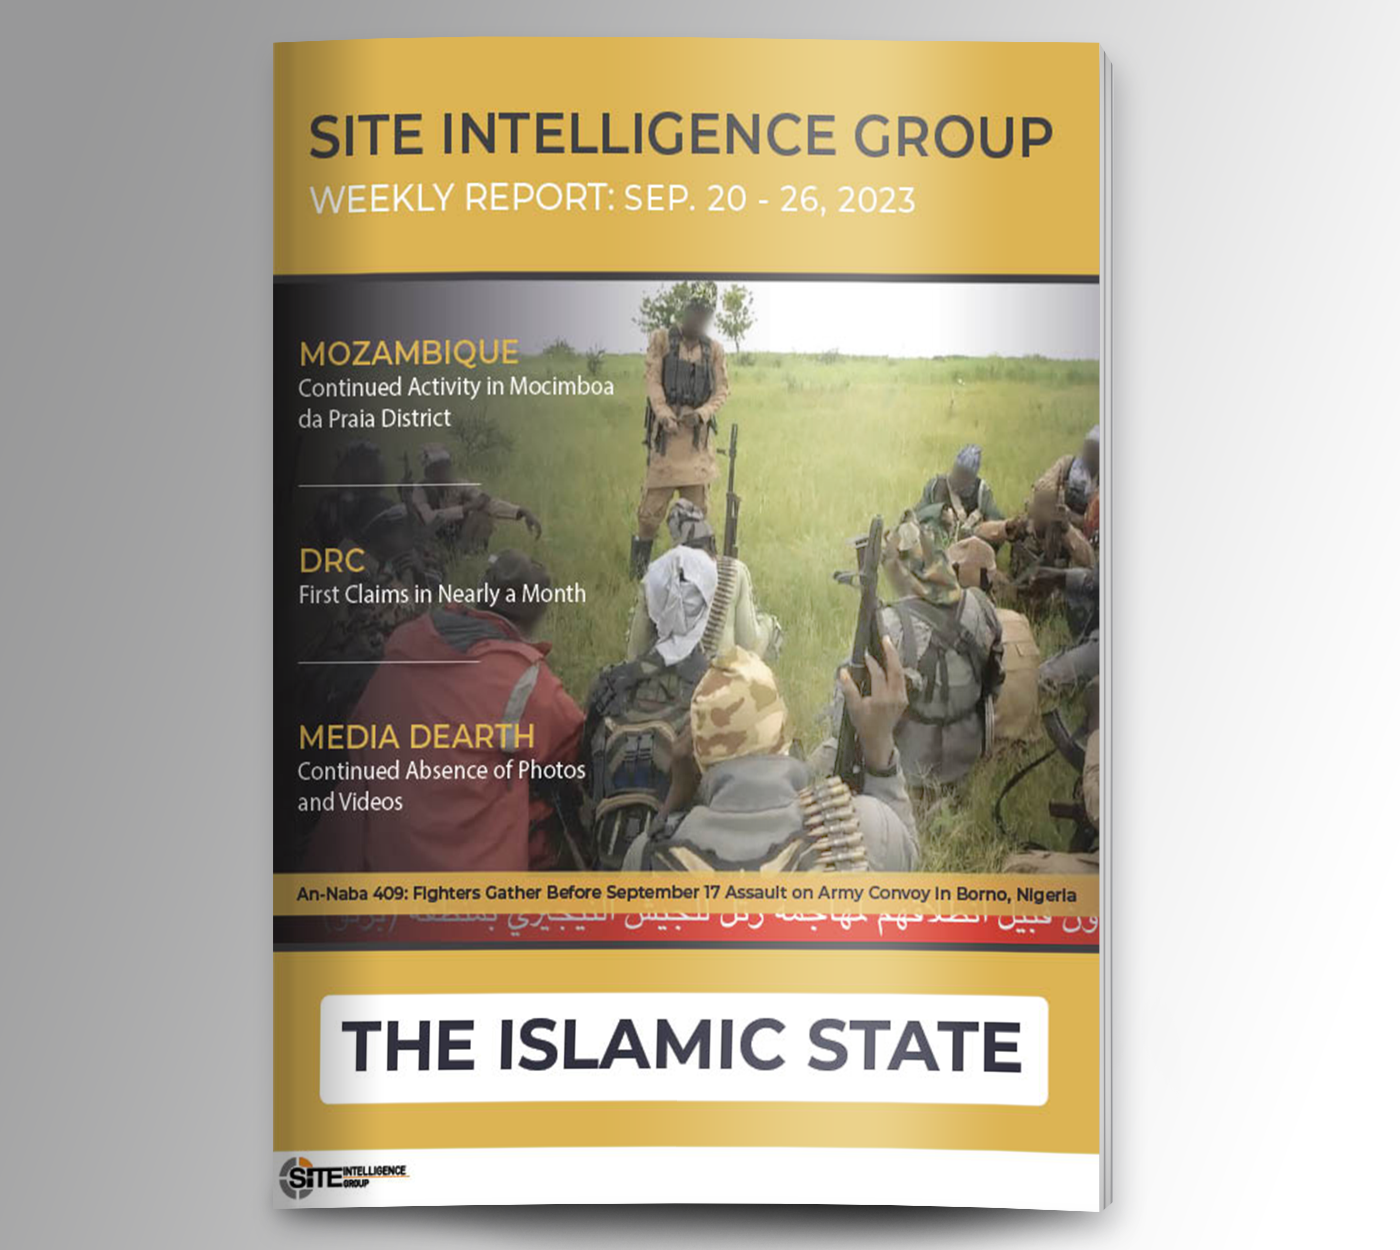 Weekly inSITE on the Islamic State for September 20-26, 2023